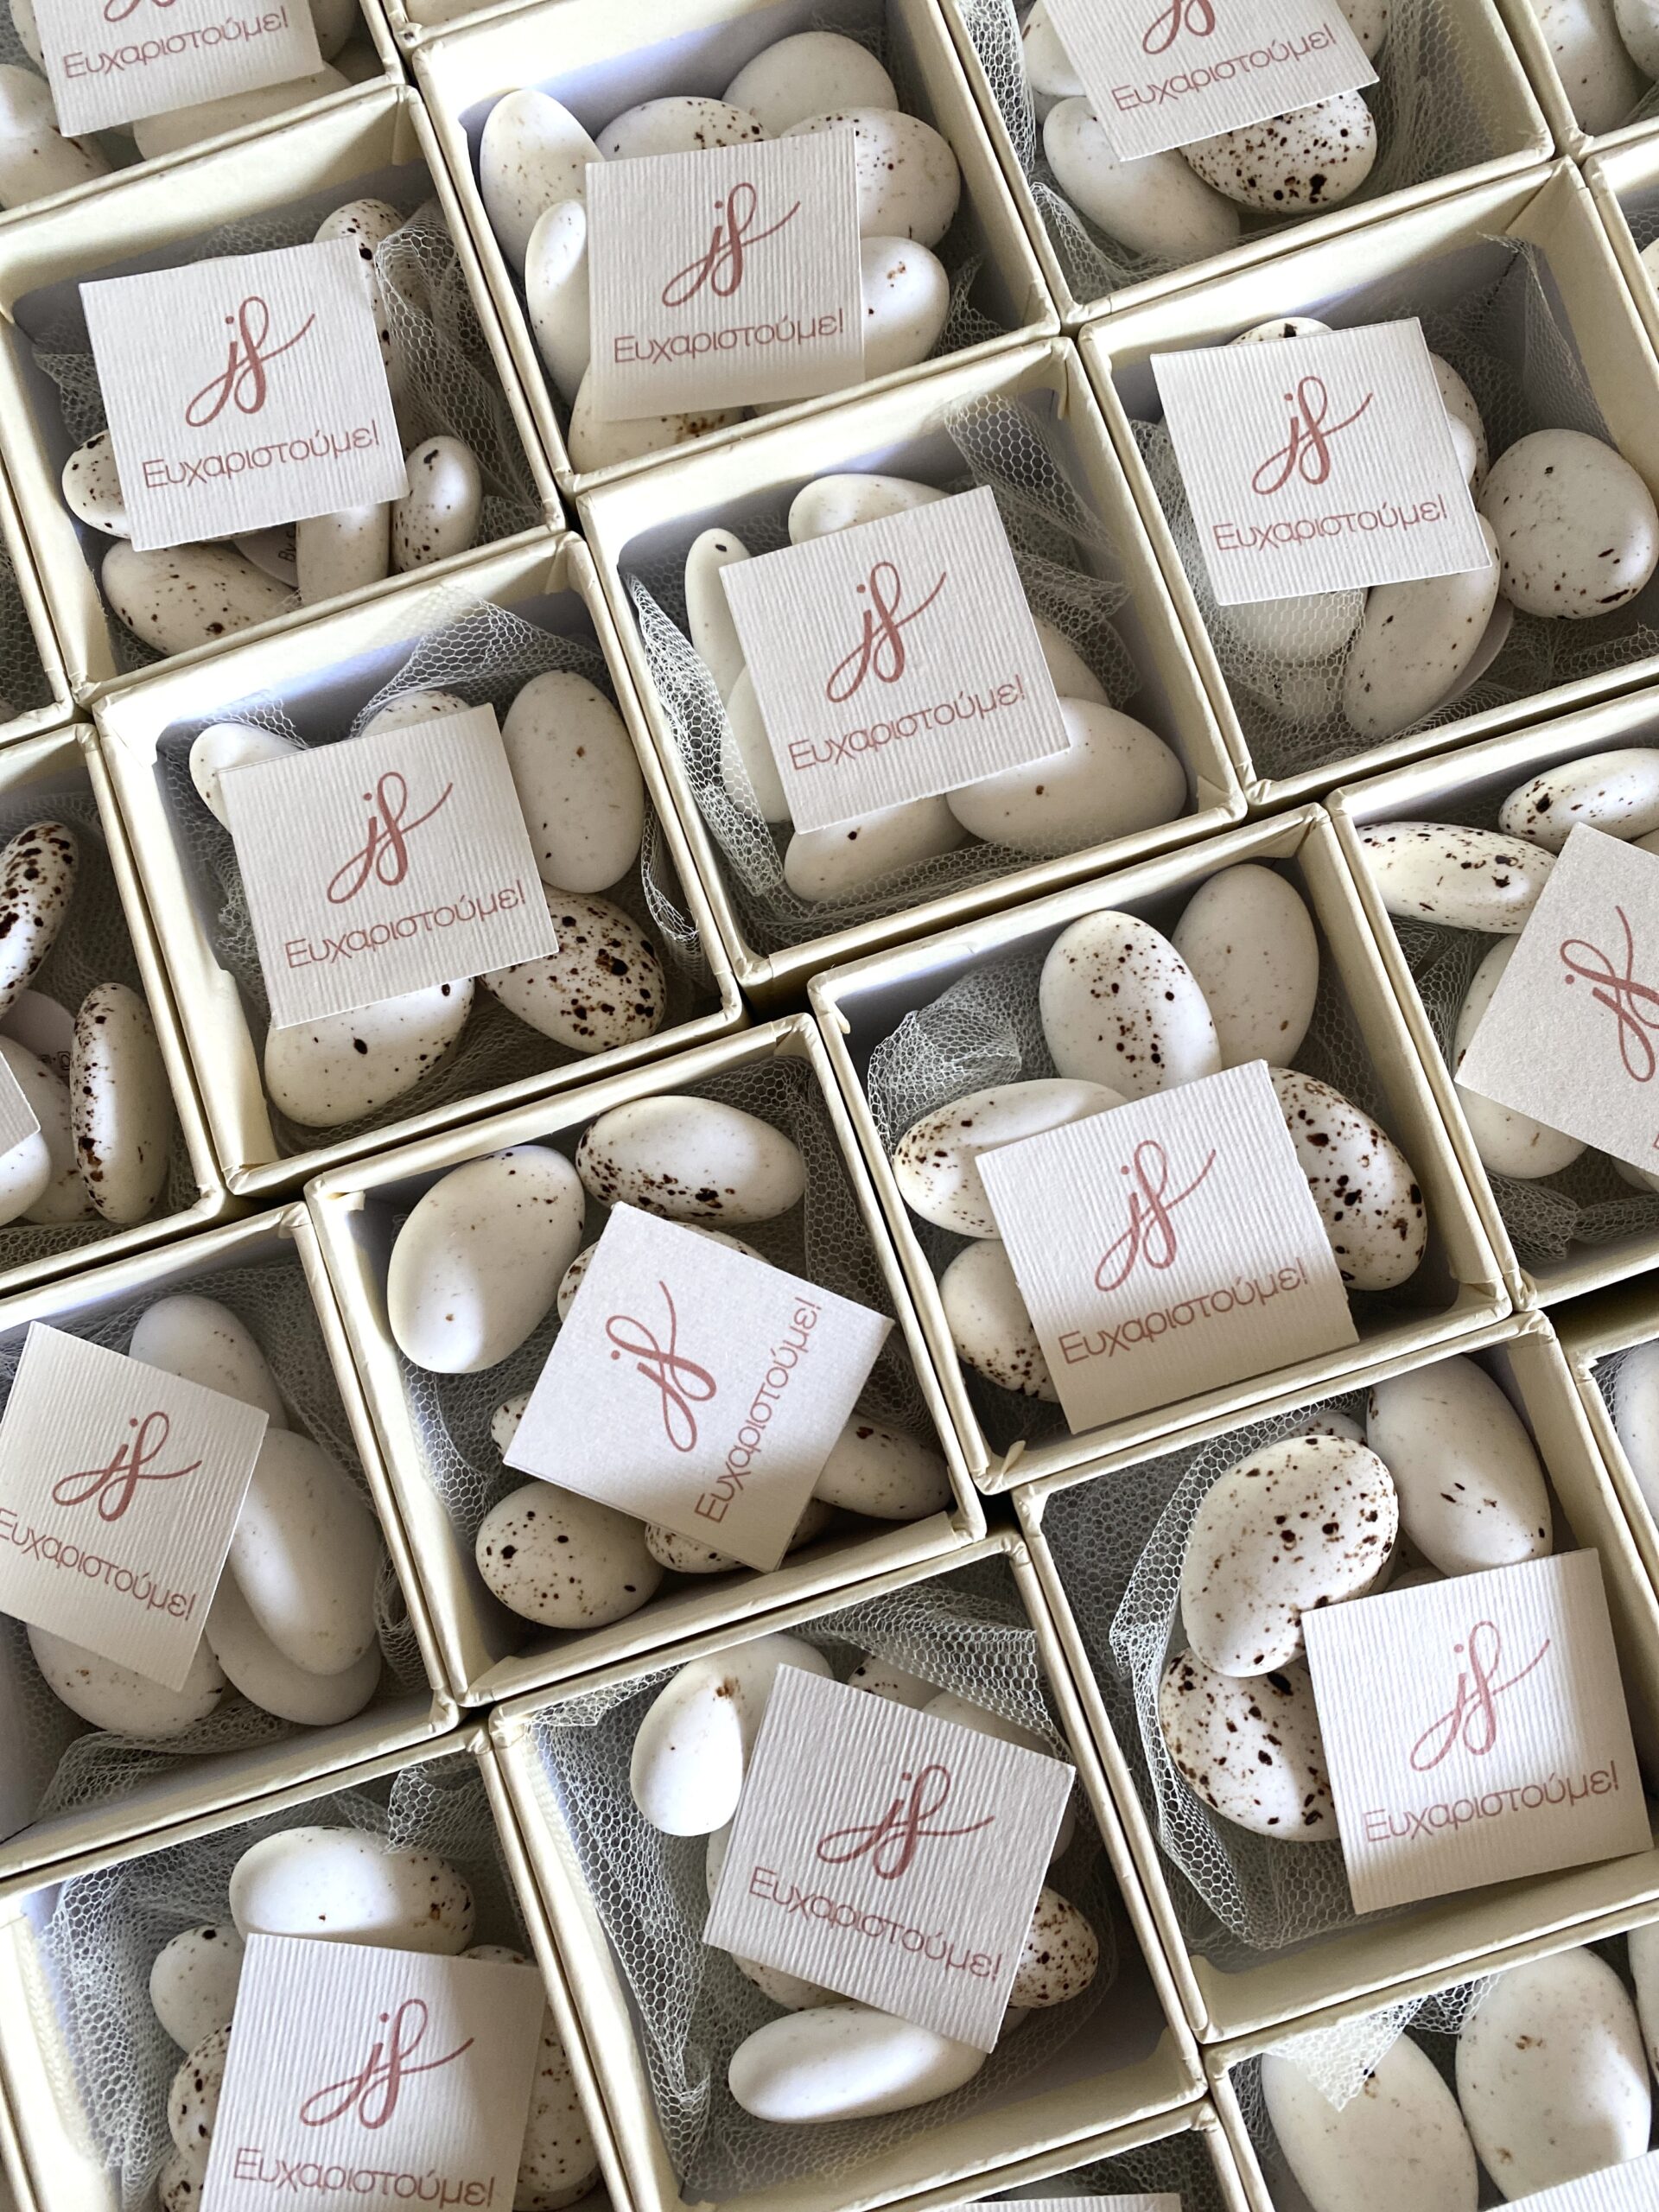 the-dreamers-wedding-and-baptism-favor-boxes-inside-dragees-thank-you-card